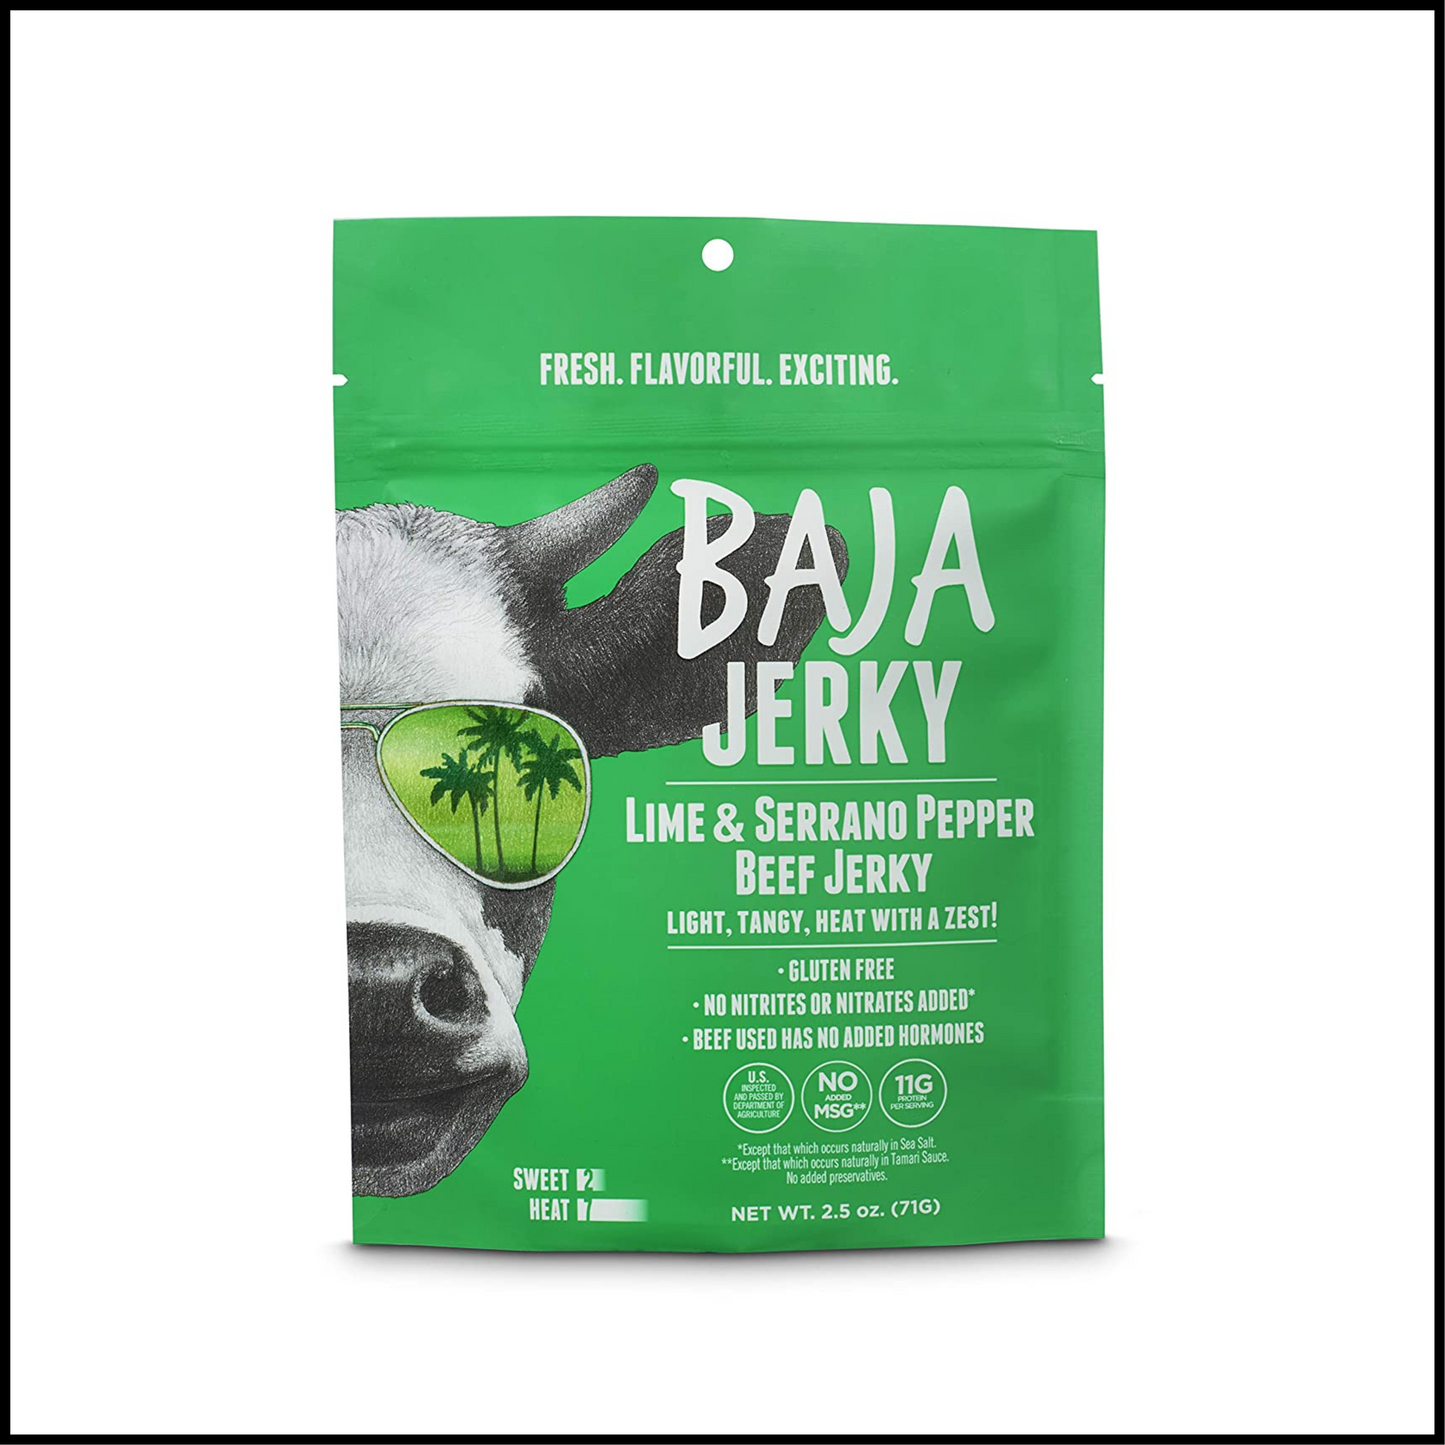 100% All Natural Beef Jerky Lime and Serrano Pepper | 2.5 oz Bag - Pack of 3